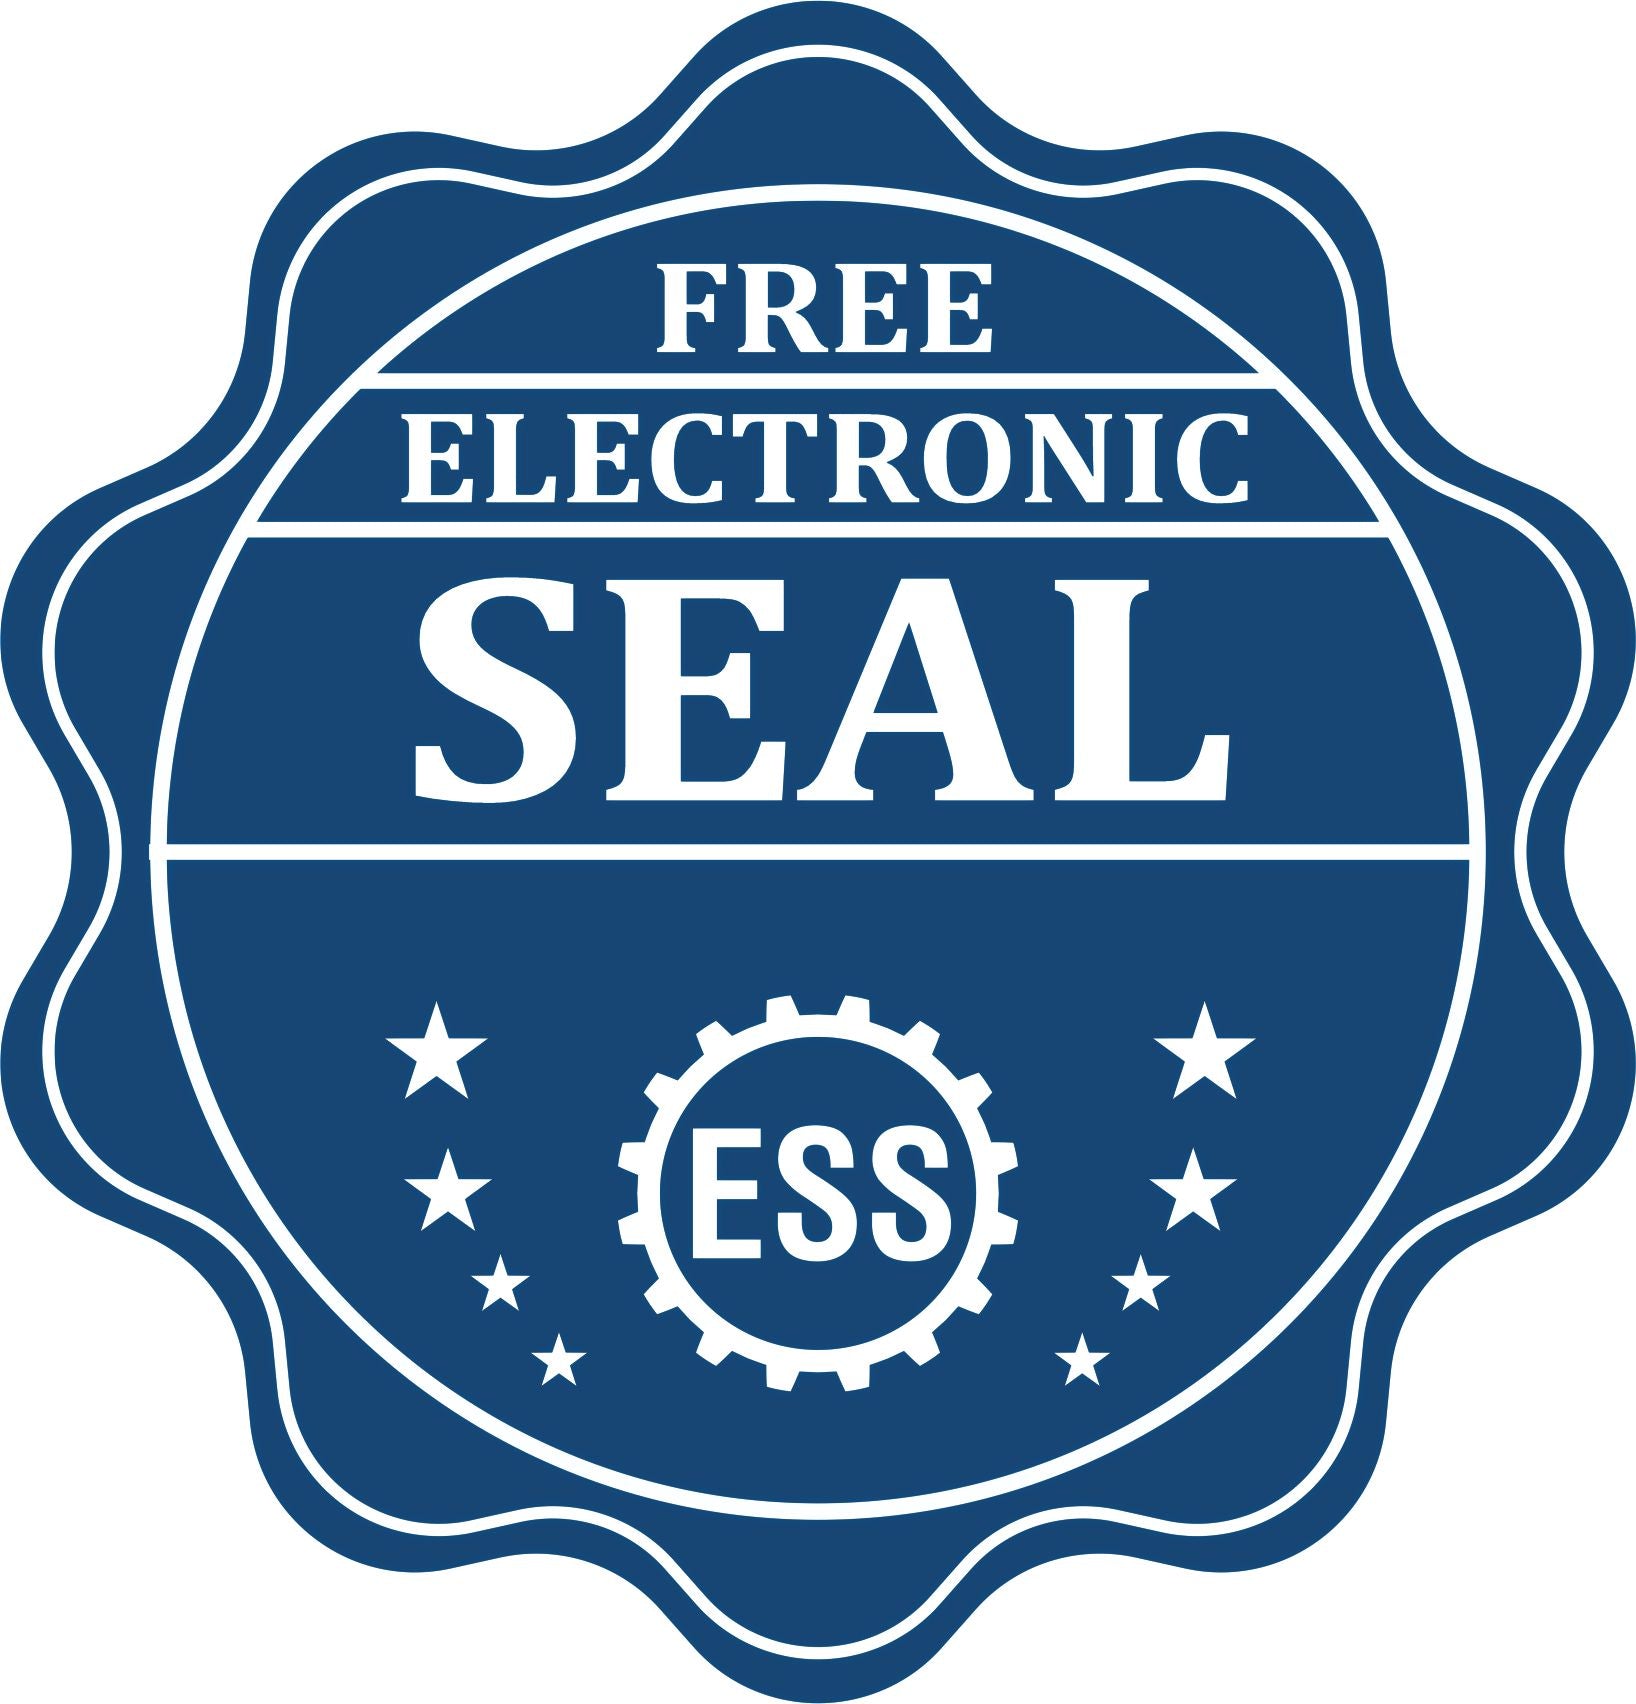 A badge showing a free electronic seal for the Handheld Guam Land Surveyor Seal with stars and the ESS gear on the emblem.